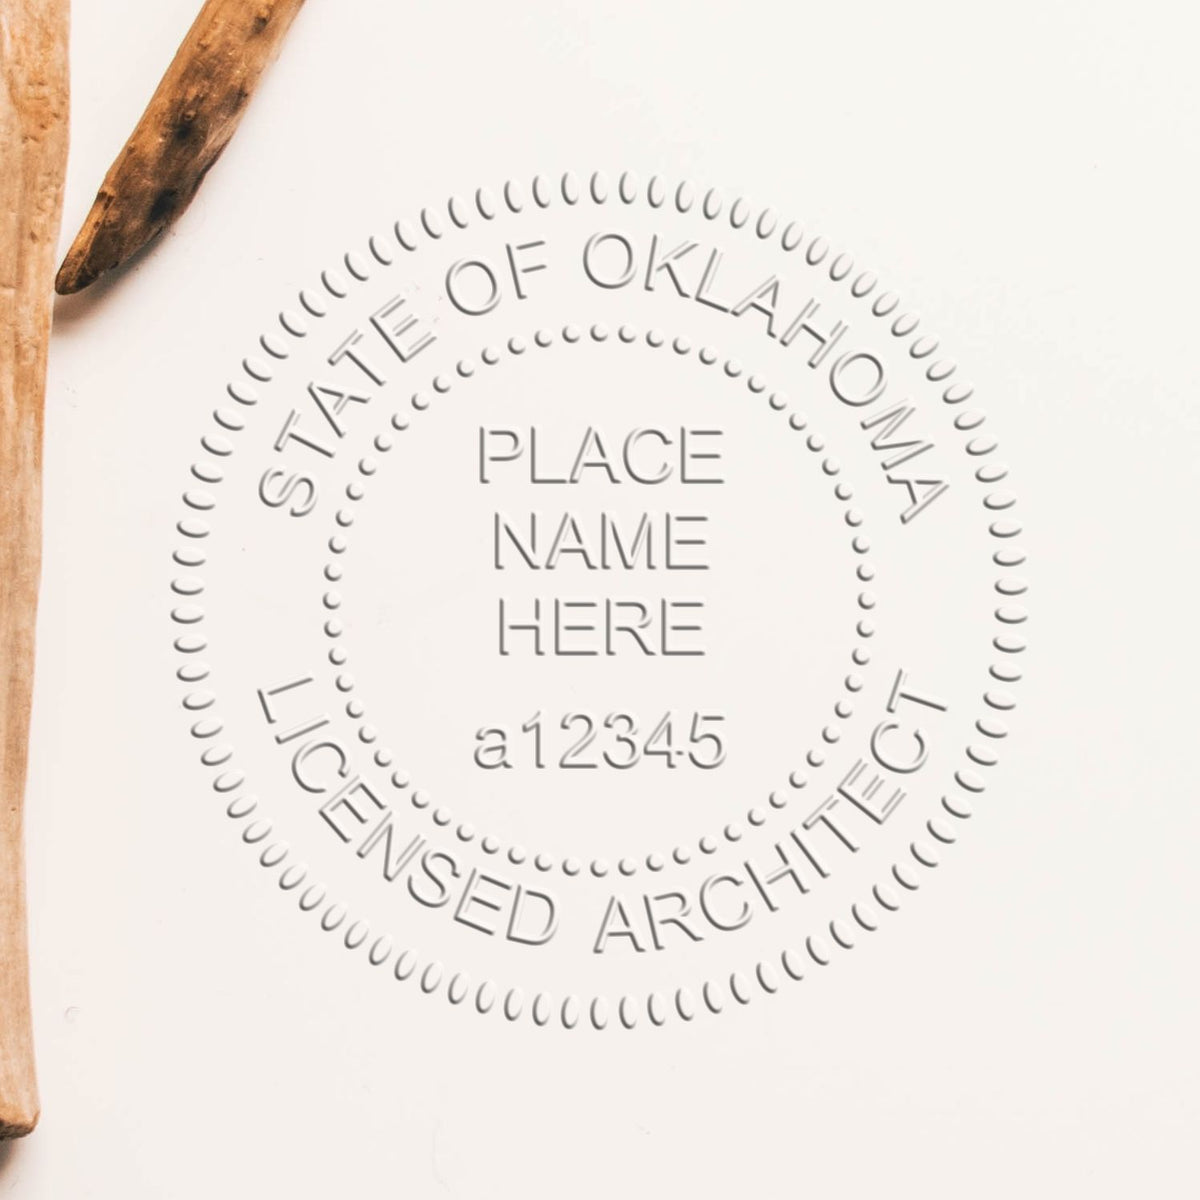 A stamped imprint of the Gift Oklahoma Architect Seal in this stylish lifestyle photo, setting the tone for a unique and personalized product.